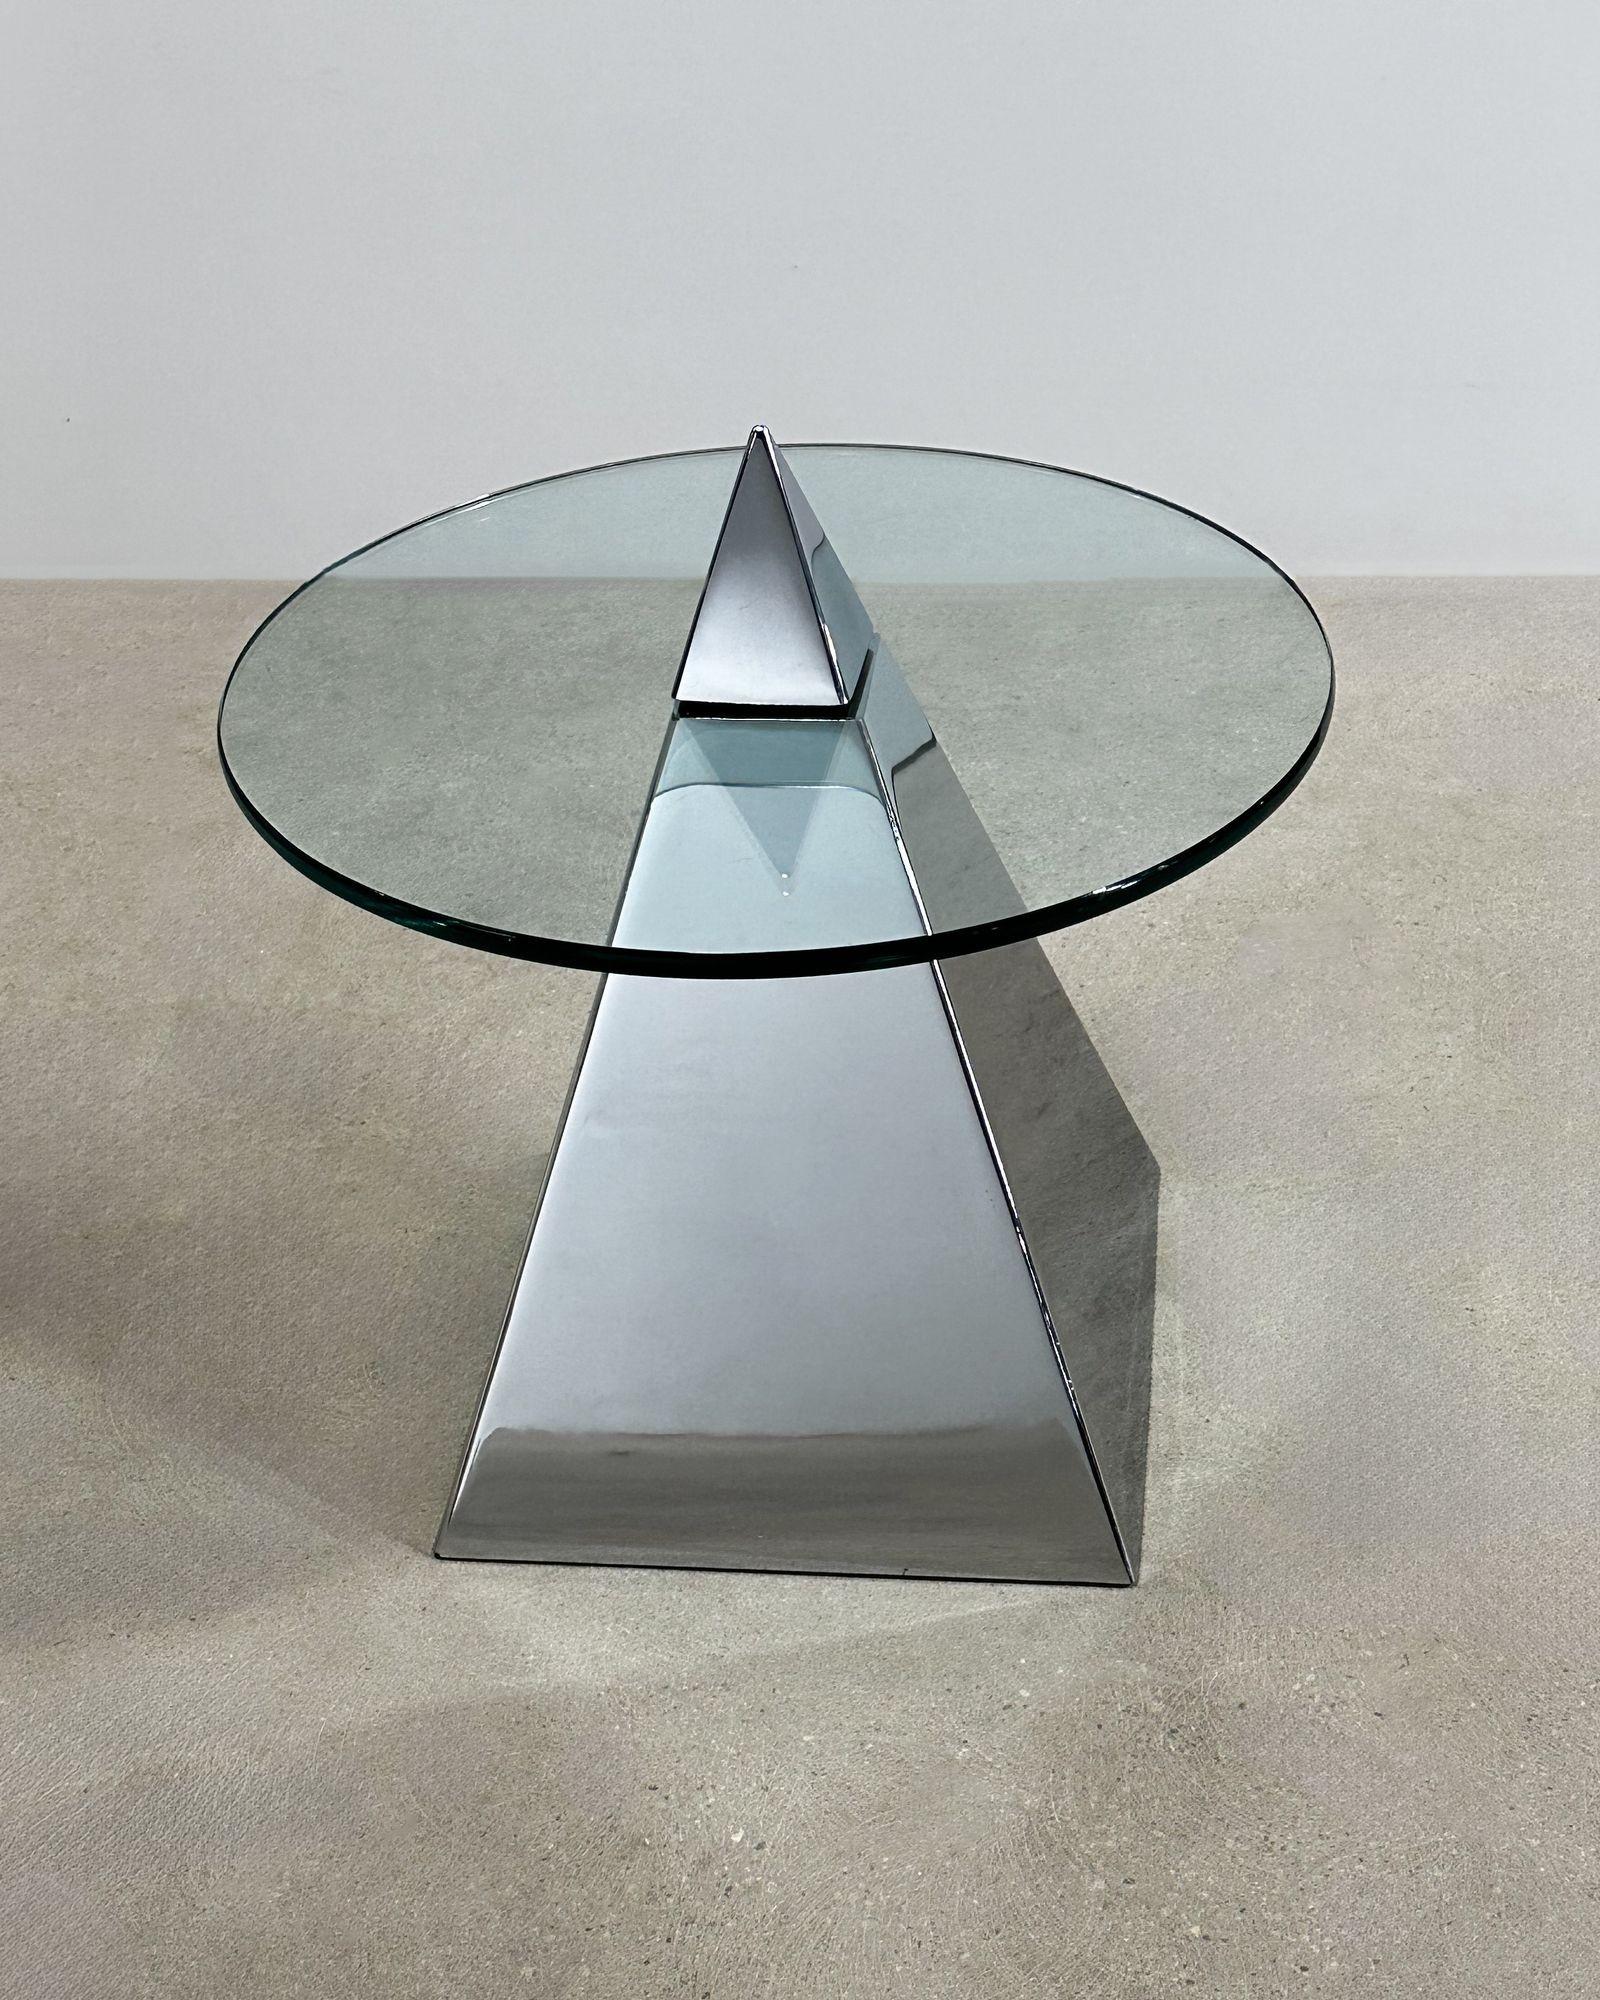 Post Modern Chrome and Glass Triangle/Pyramid Side/End Table, 1980. Excellent condition.
Measures 21.5